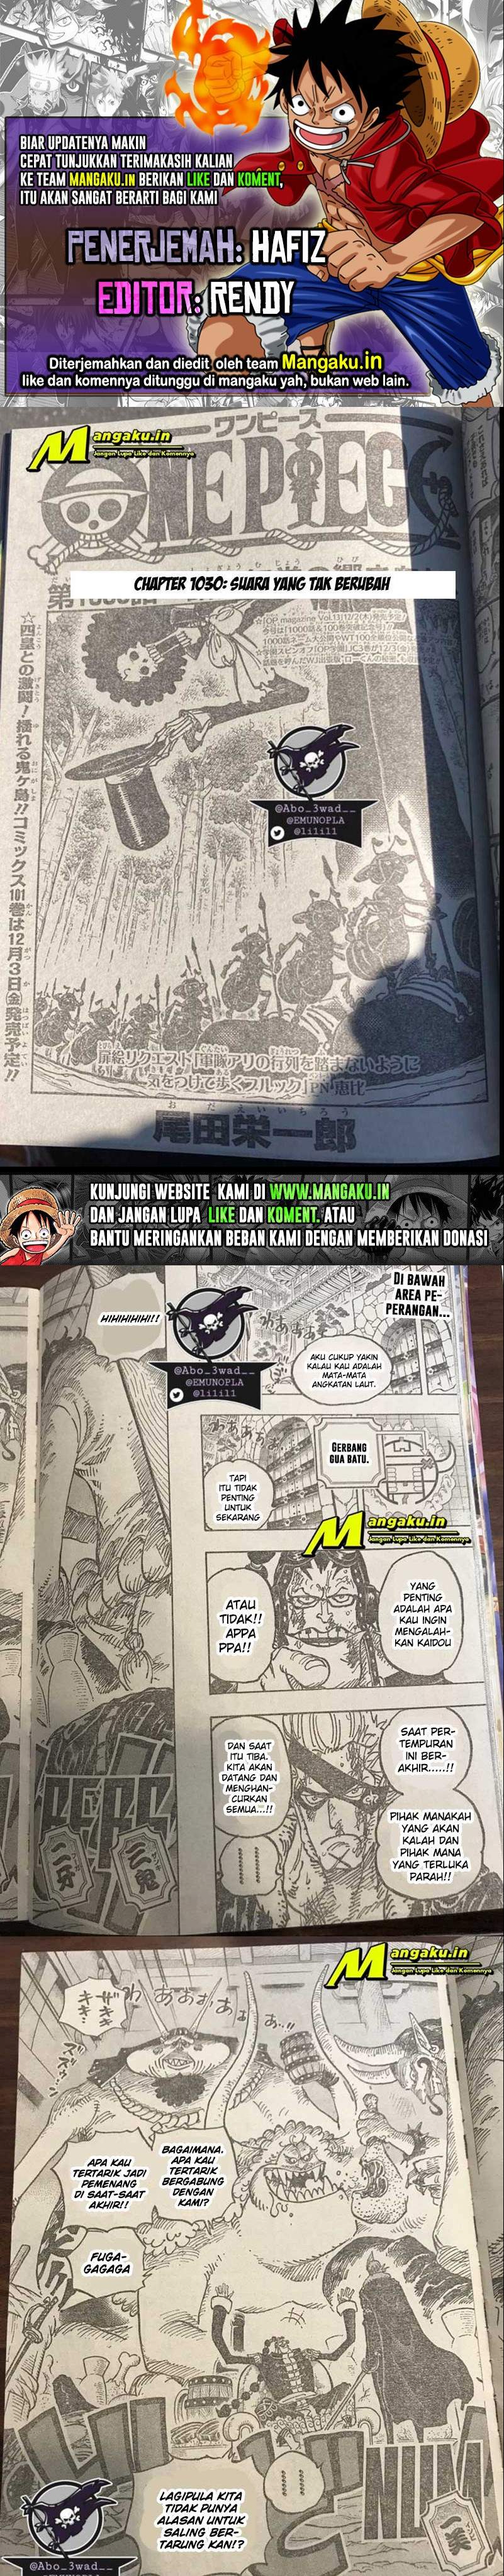 One Piece Chapter 1030 LQ